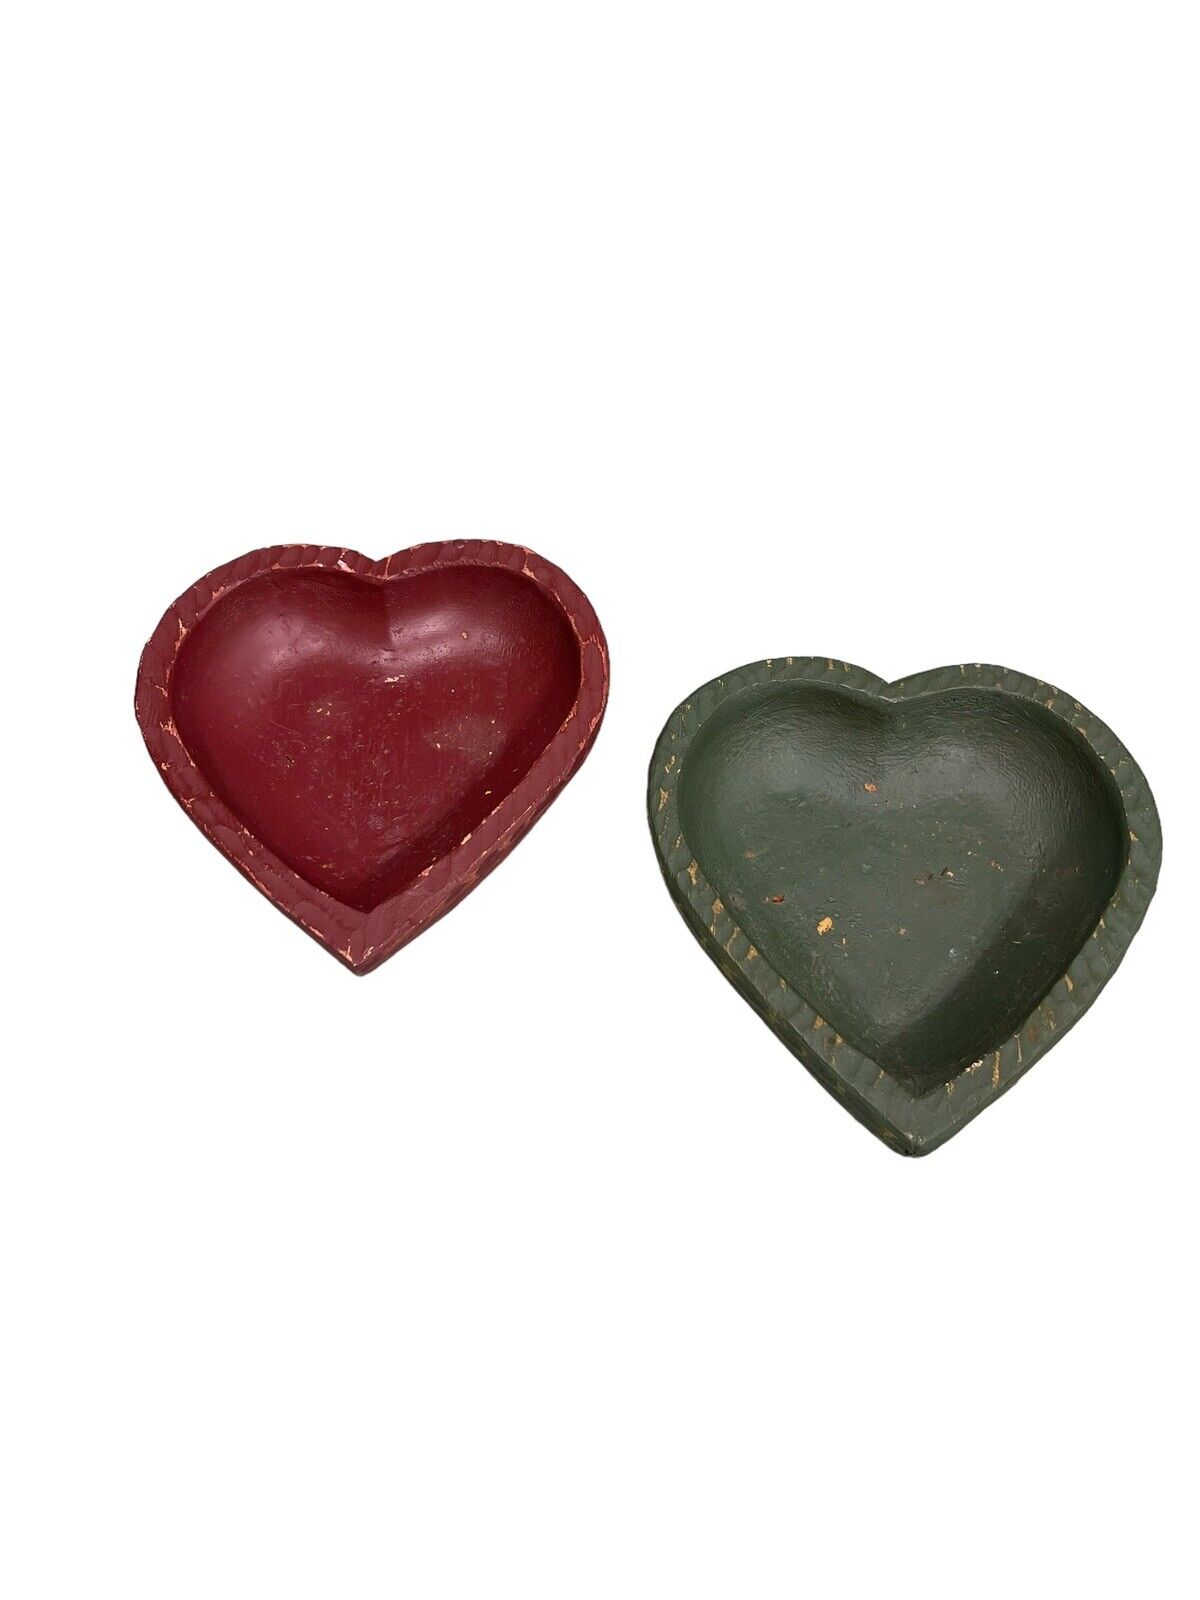 1998 Tender Heart Treasures wooden  heart shaped dishes